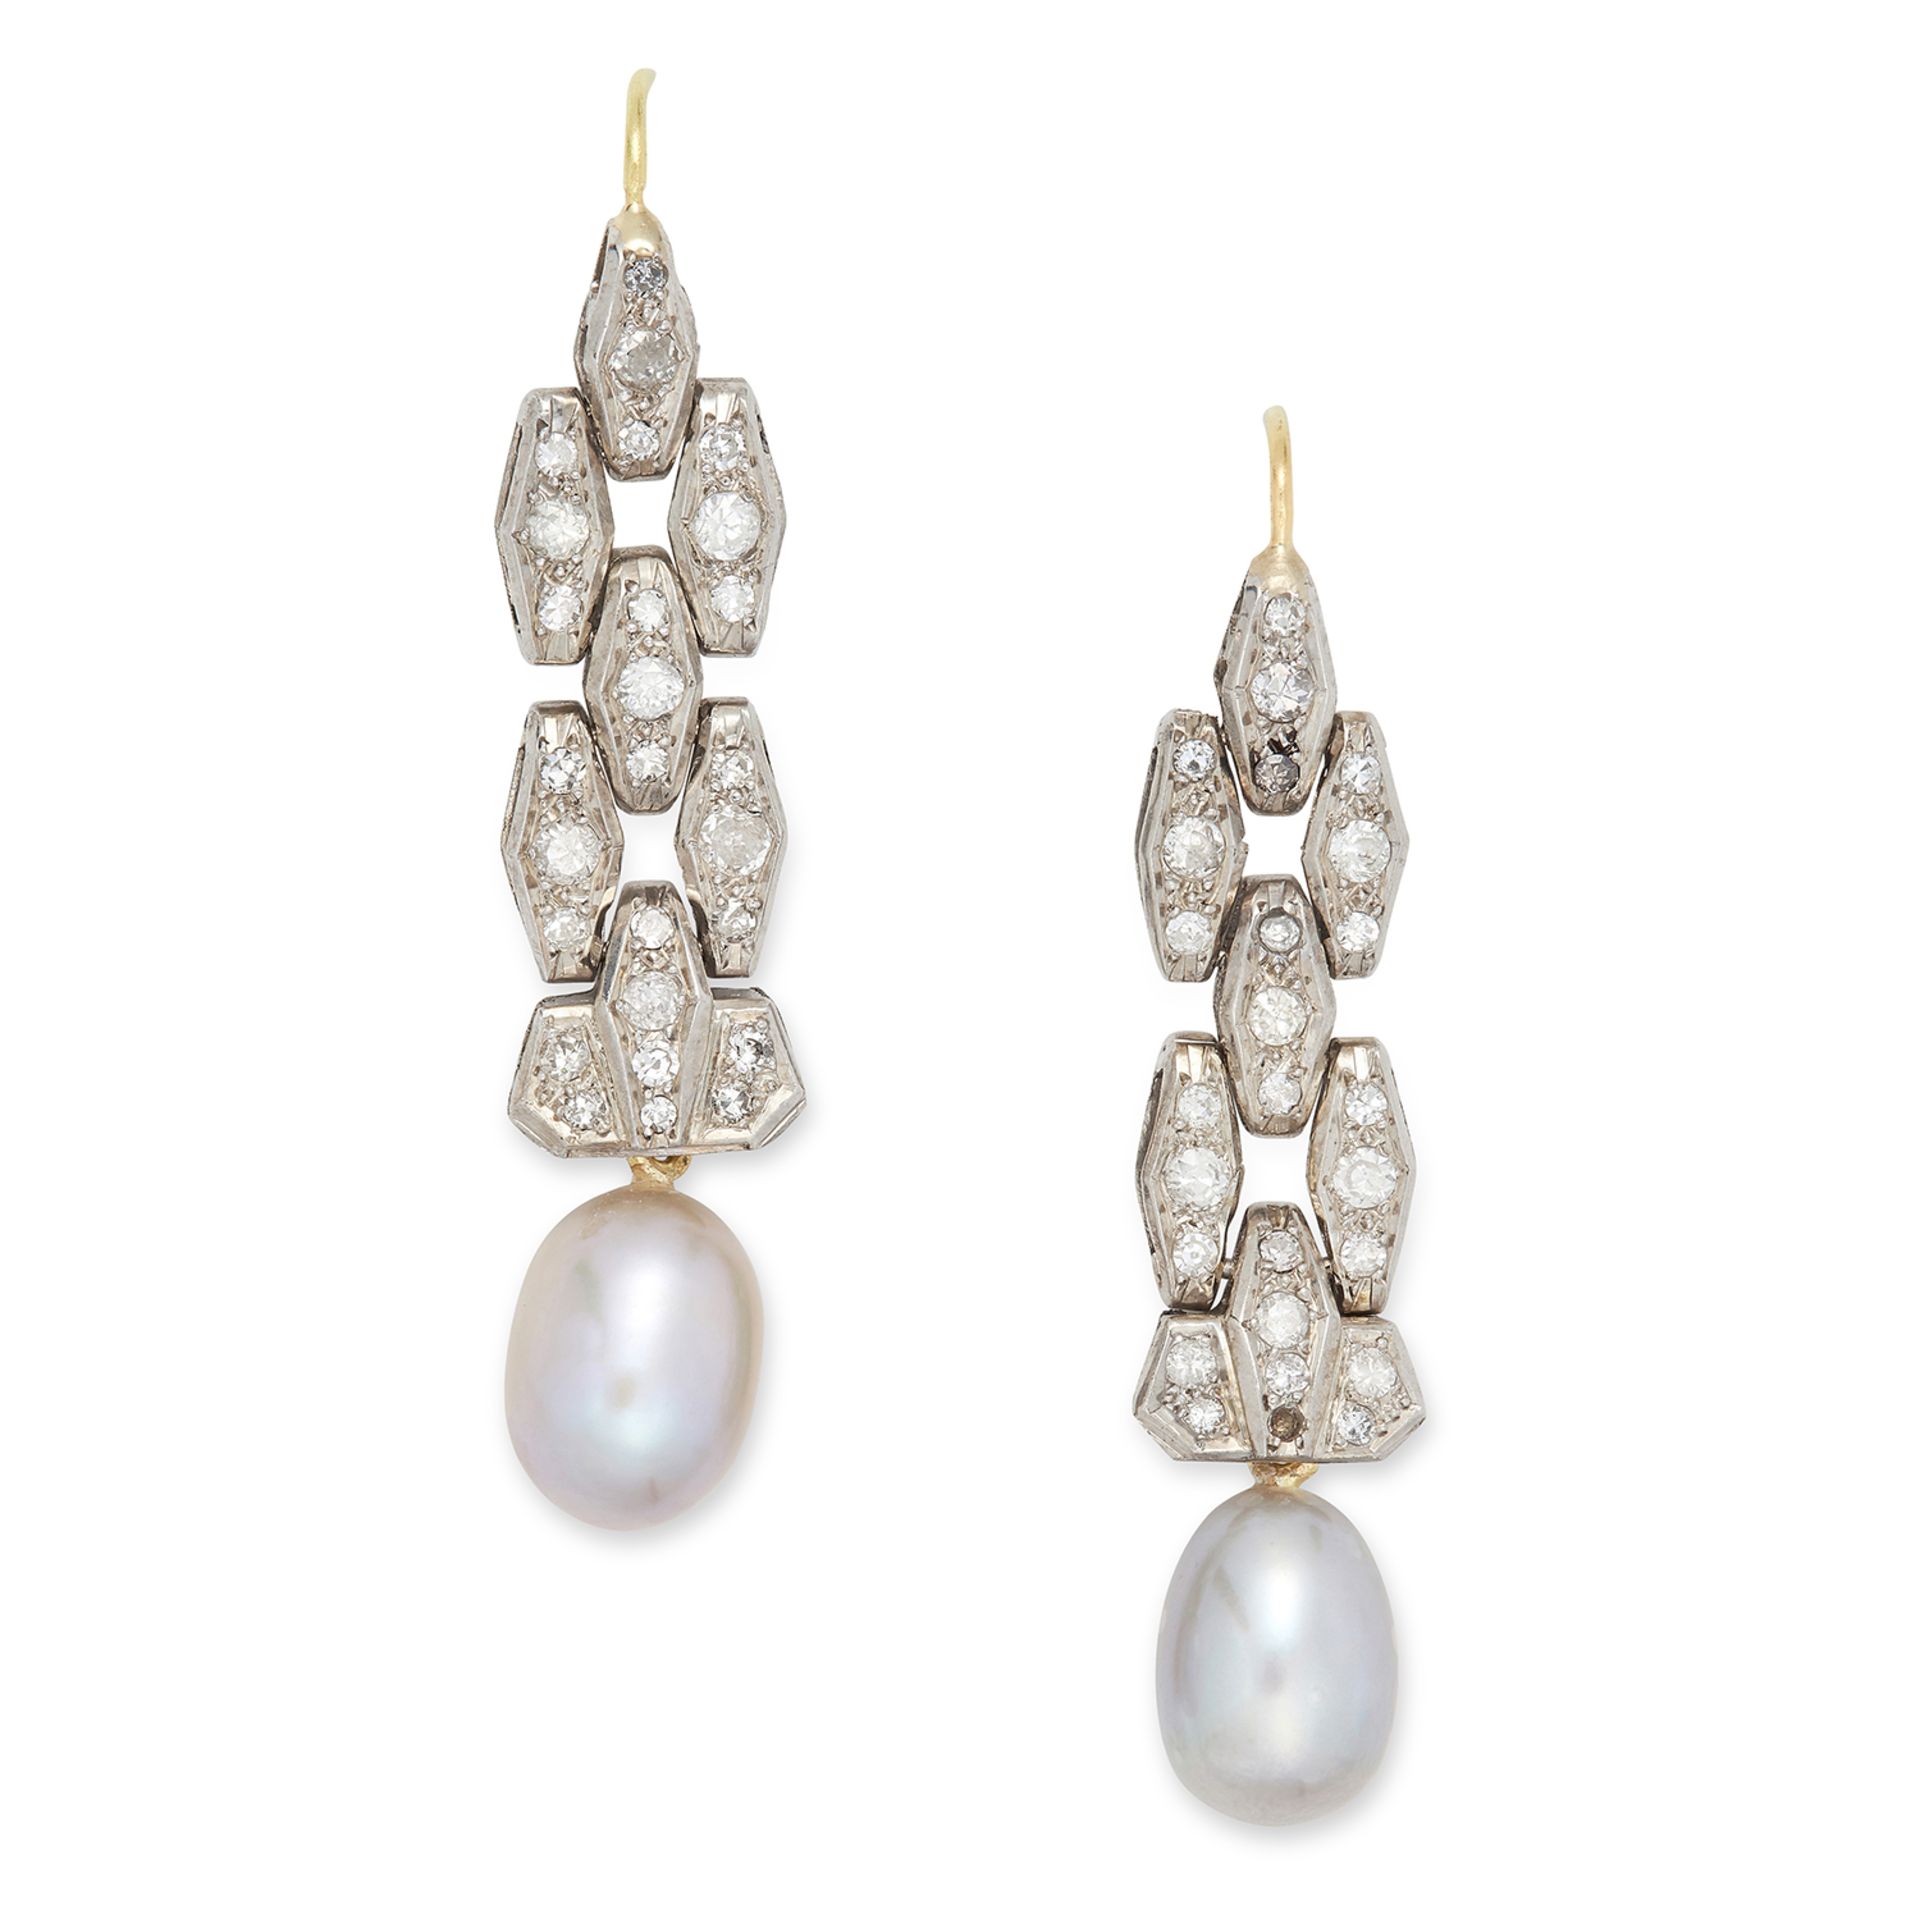 DIAMOND AND PEARL EARRINGS in Art Deco design, each set with round cut diamonds, suspending a pearl